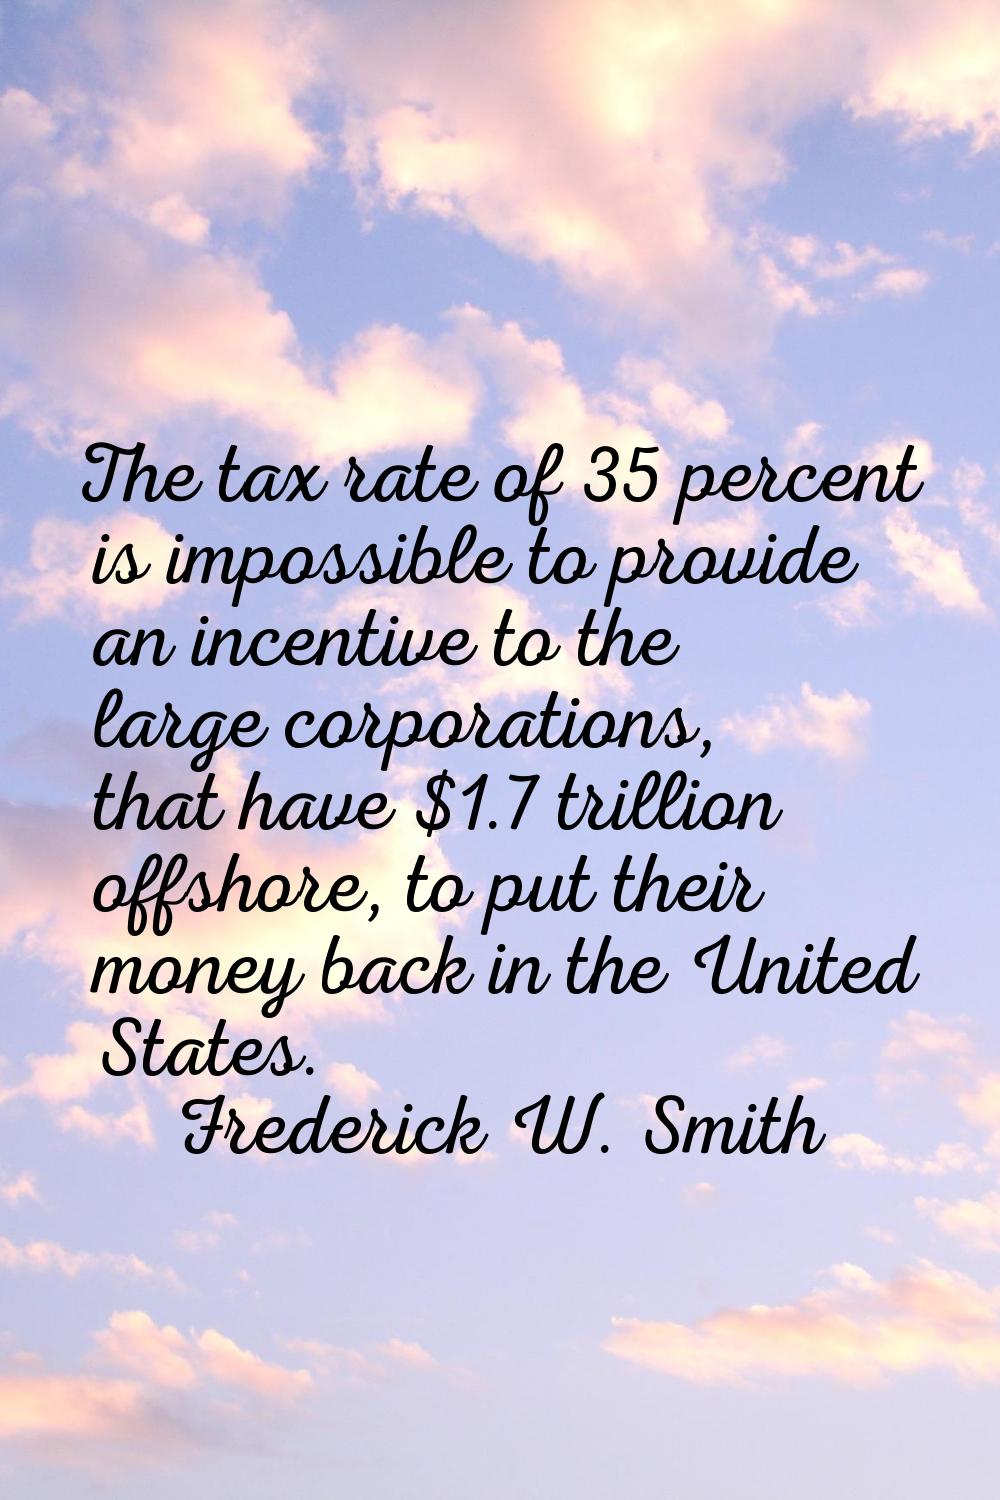 The tax rate of 35 percent is impossible to provide an incentive to the large corporations, that ha